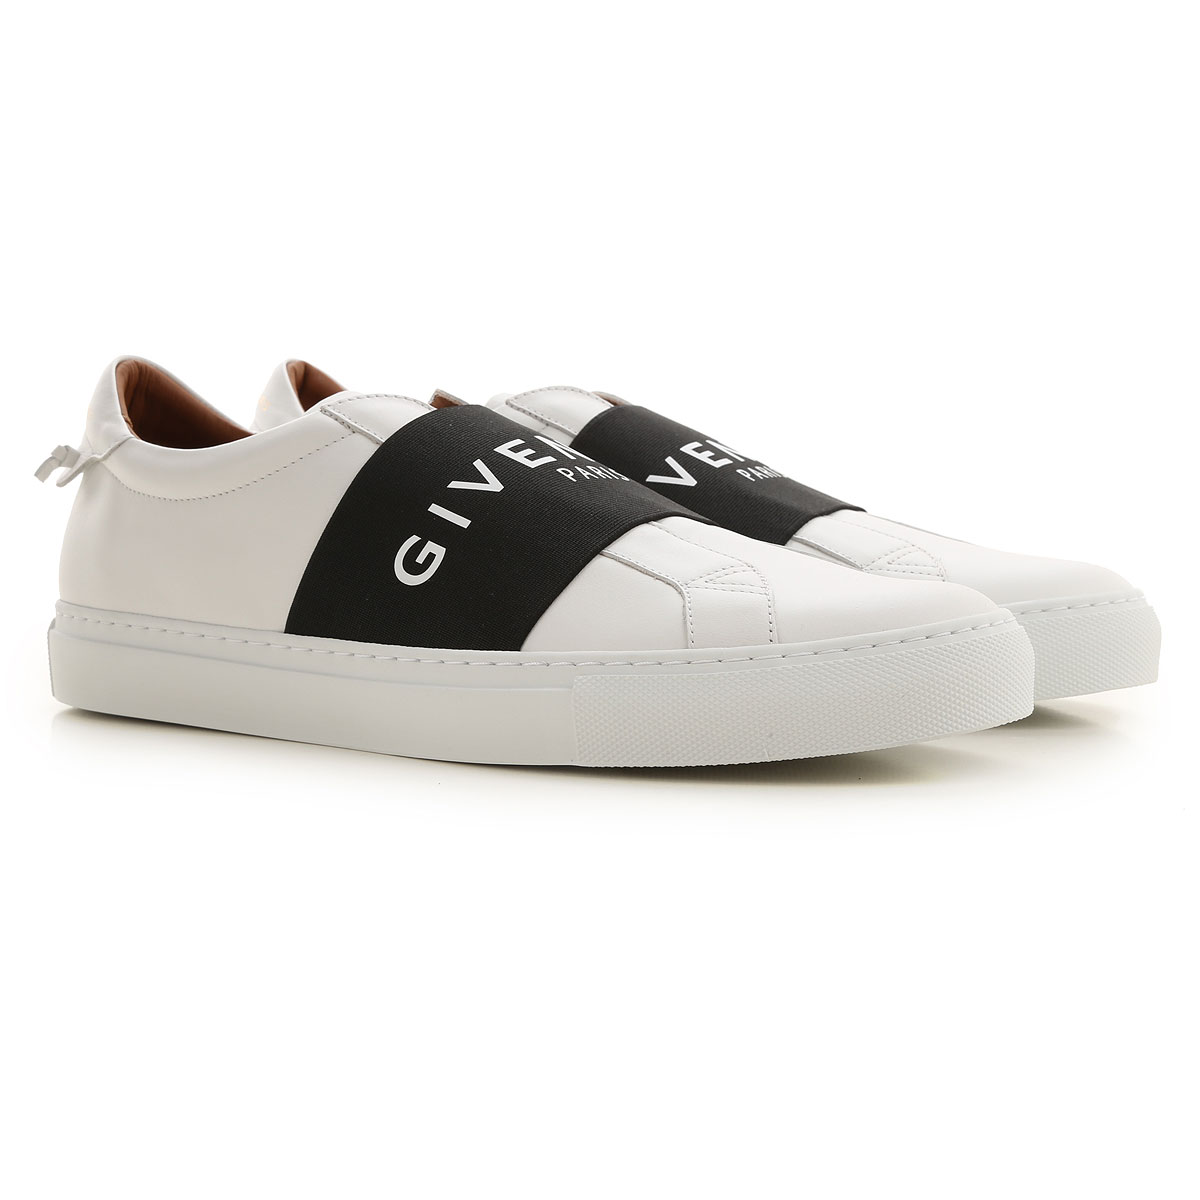 bent hostel emotional Mens Shoes Givenchy, Style code: bh0002h0fu-116-